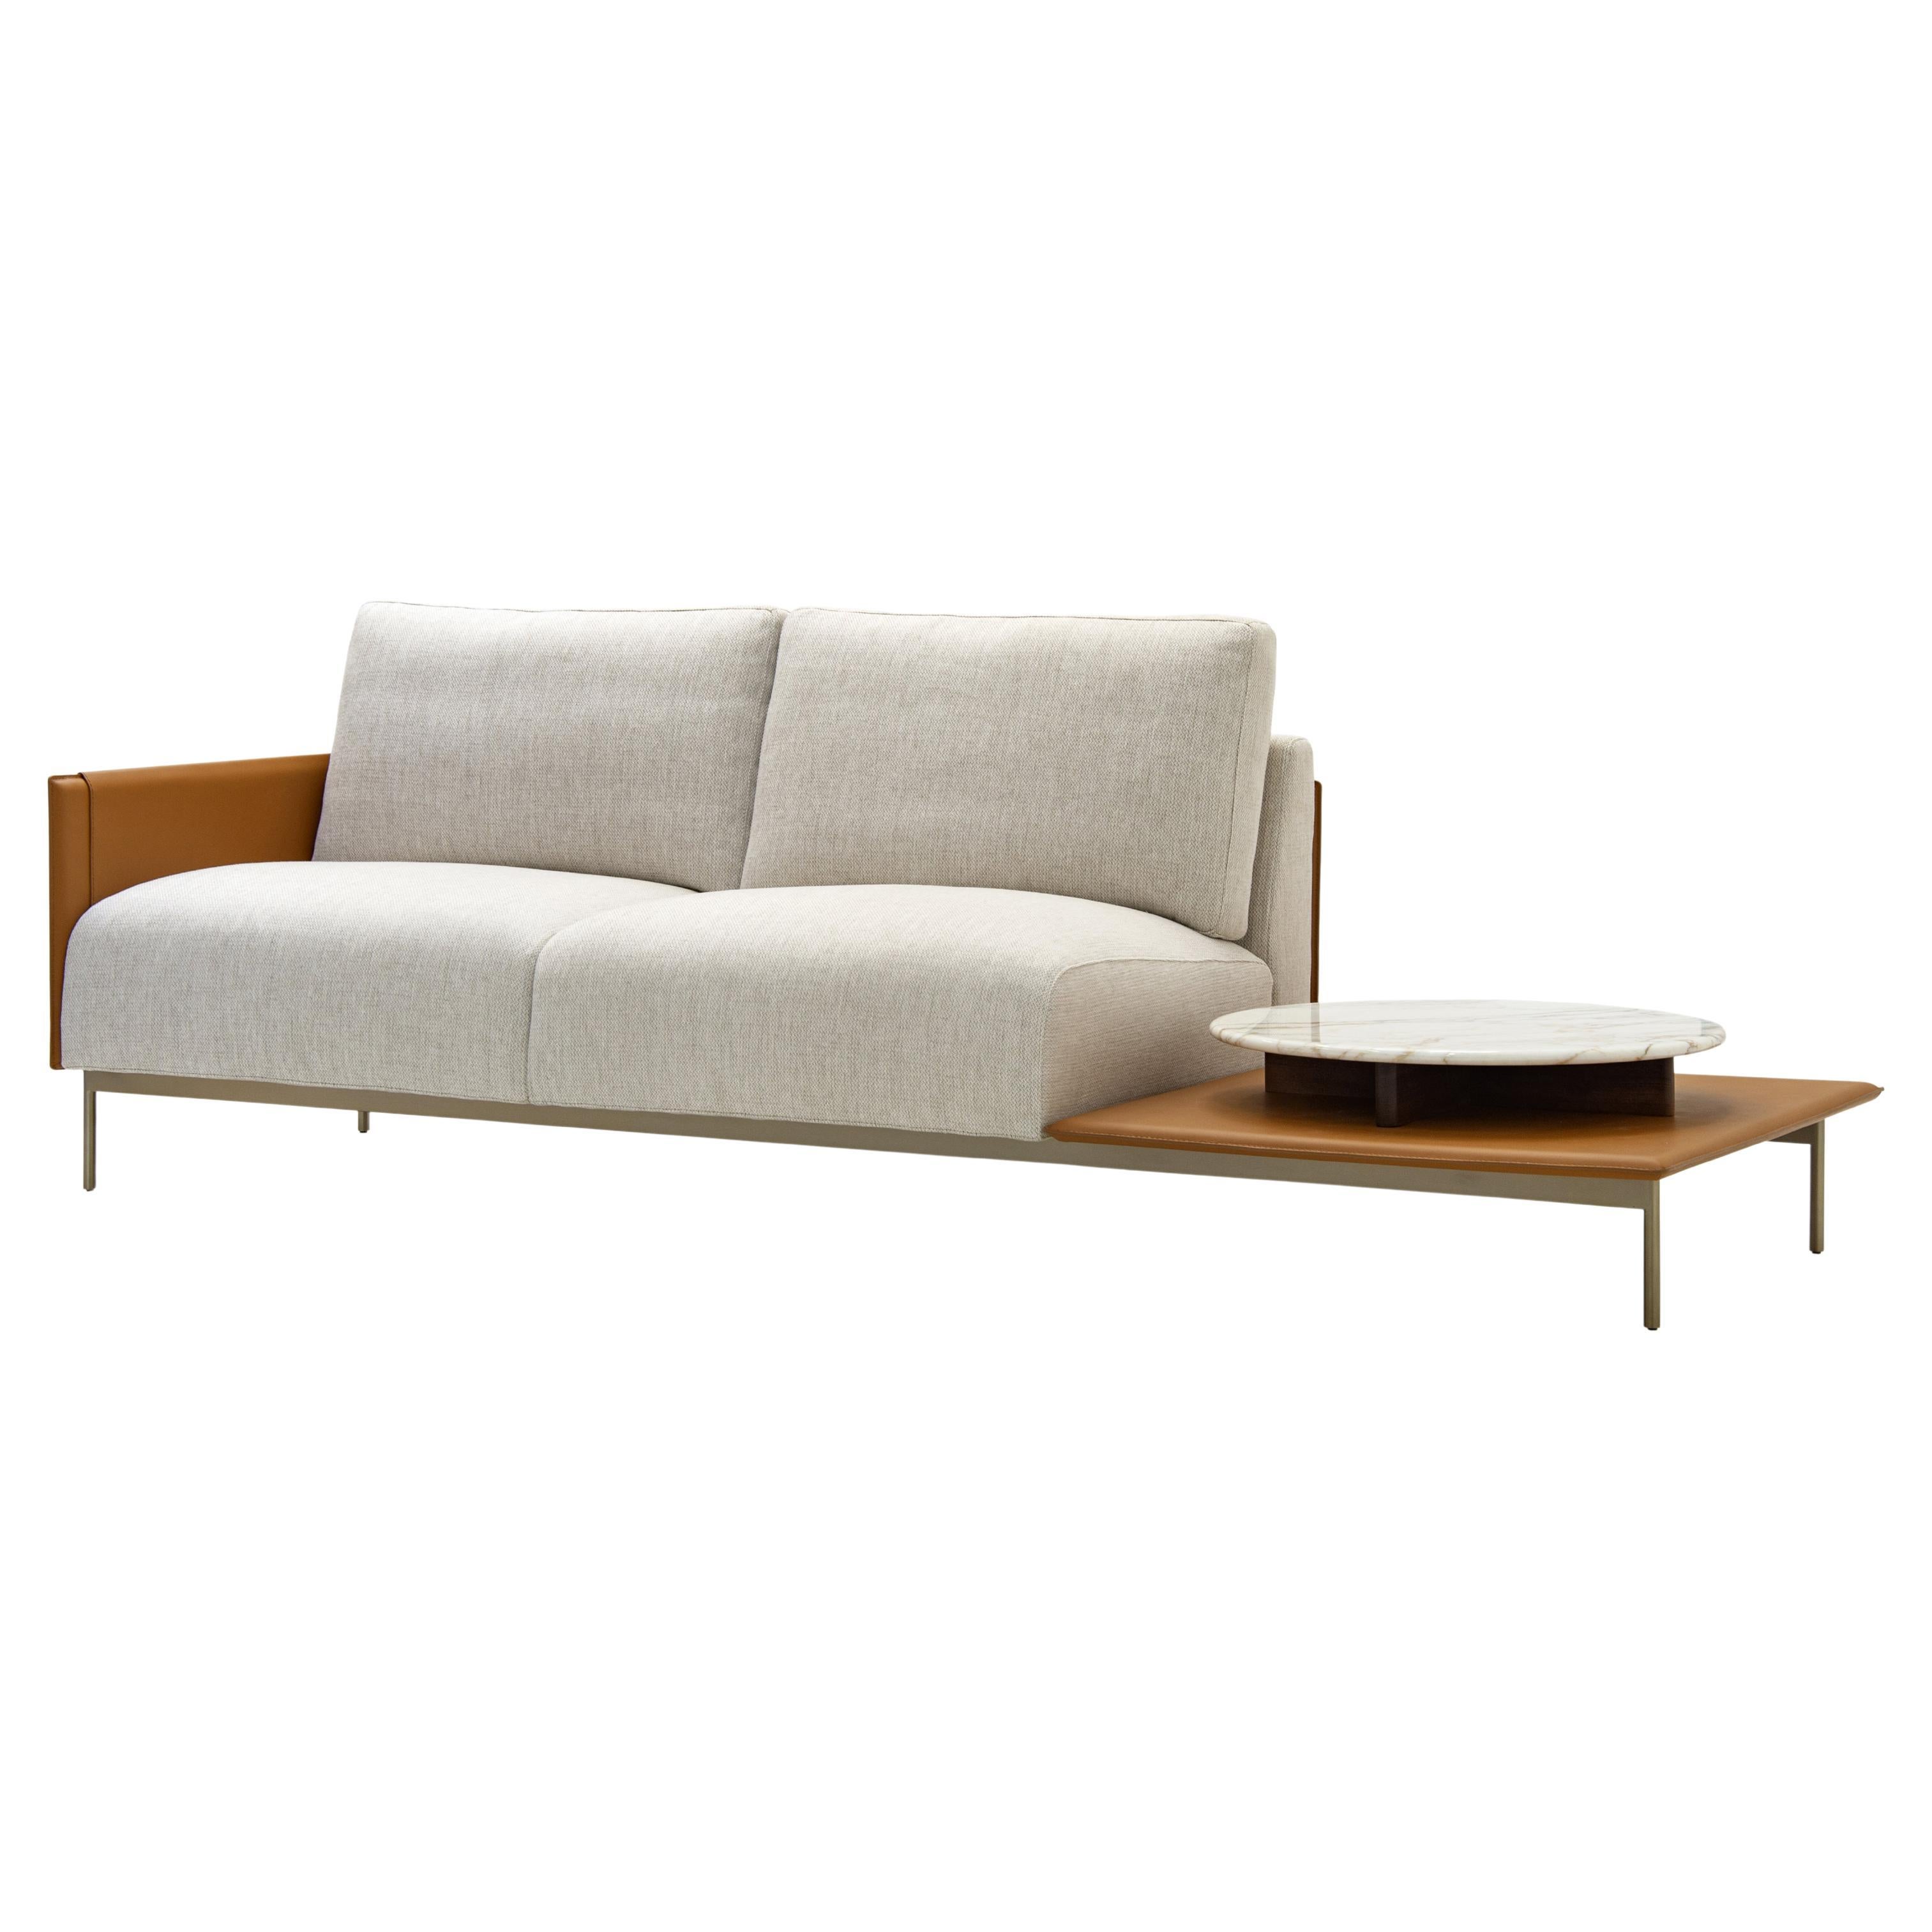 Contemporary Design, Iconic Sofa with Tray in Natural Saddle Leather V215/T